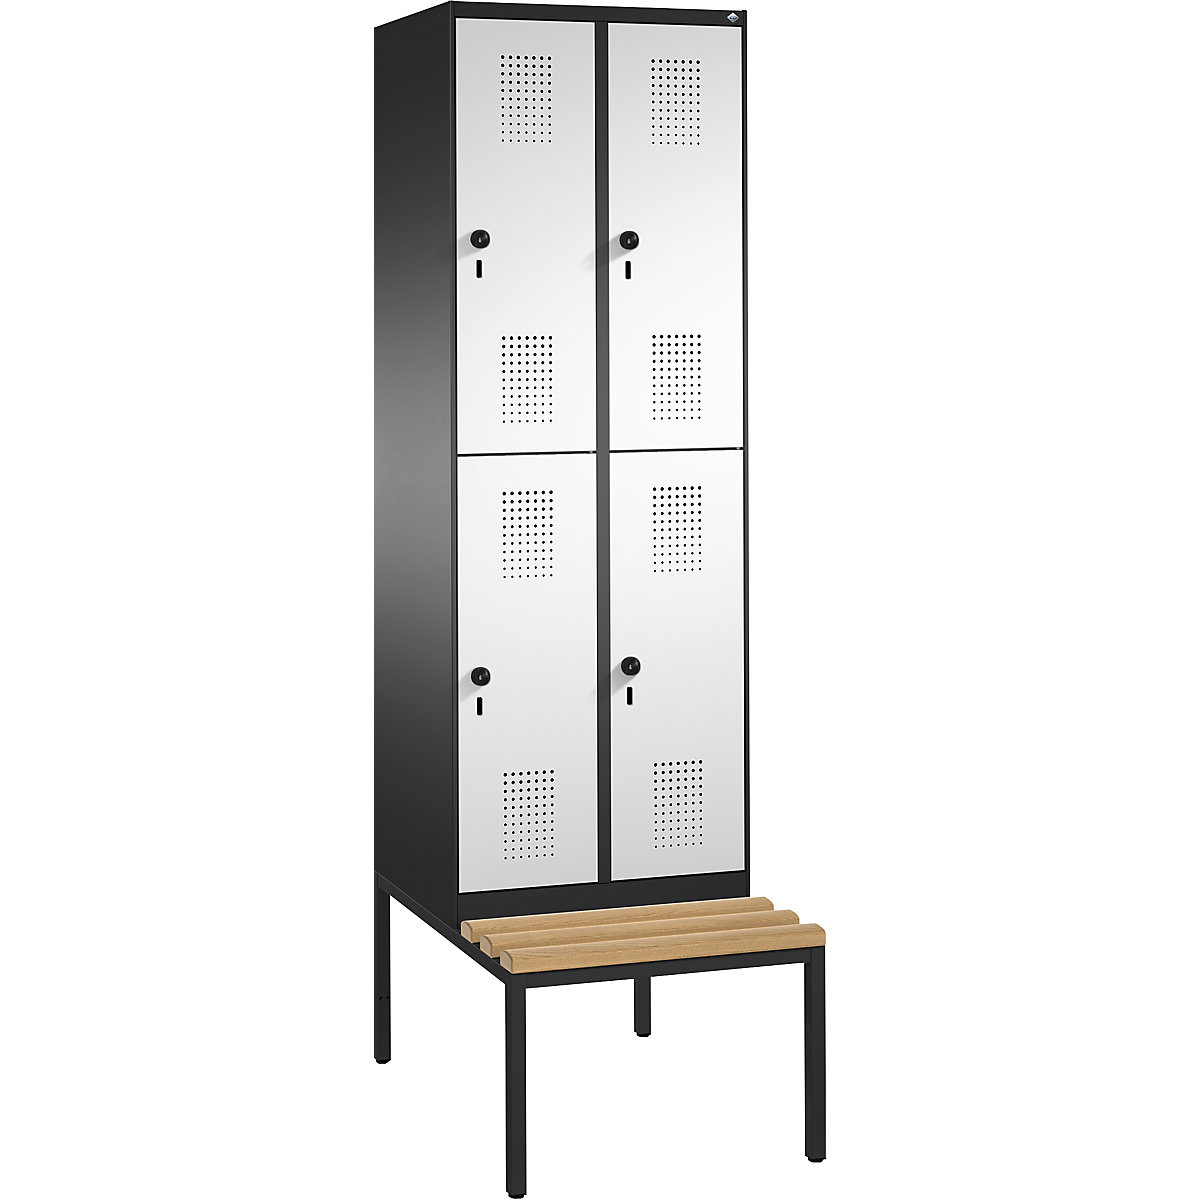 EVOLO cloakroom locker, double tier, with bench – C+P, 2 compartments, 2 shelf compartments each, compartment width 300 mm, black grey / light grey-10